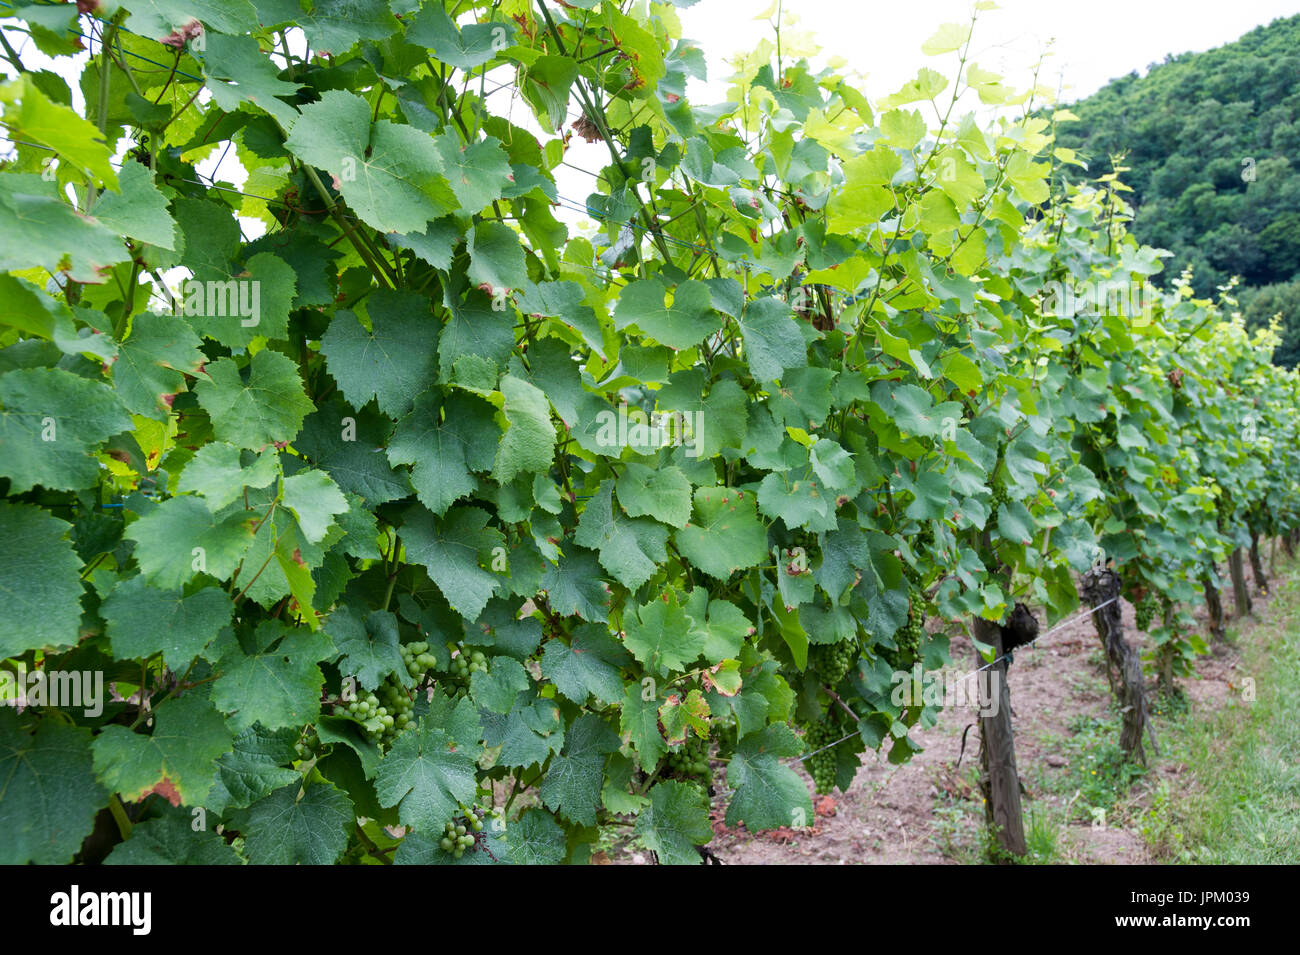 Vineyards in Alsace and Rhinegau in France and Germany, wine growing regions, famous wine producers offering wine tasting and are proud of their wine, Stock Photo